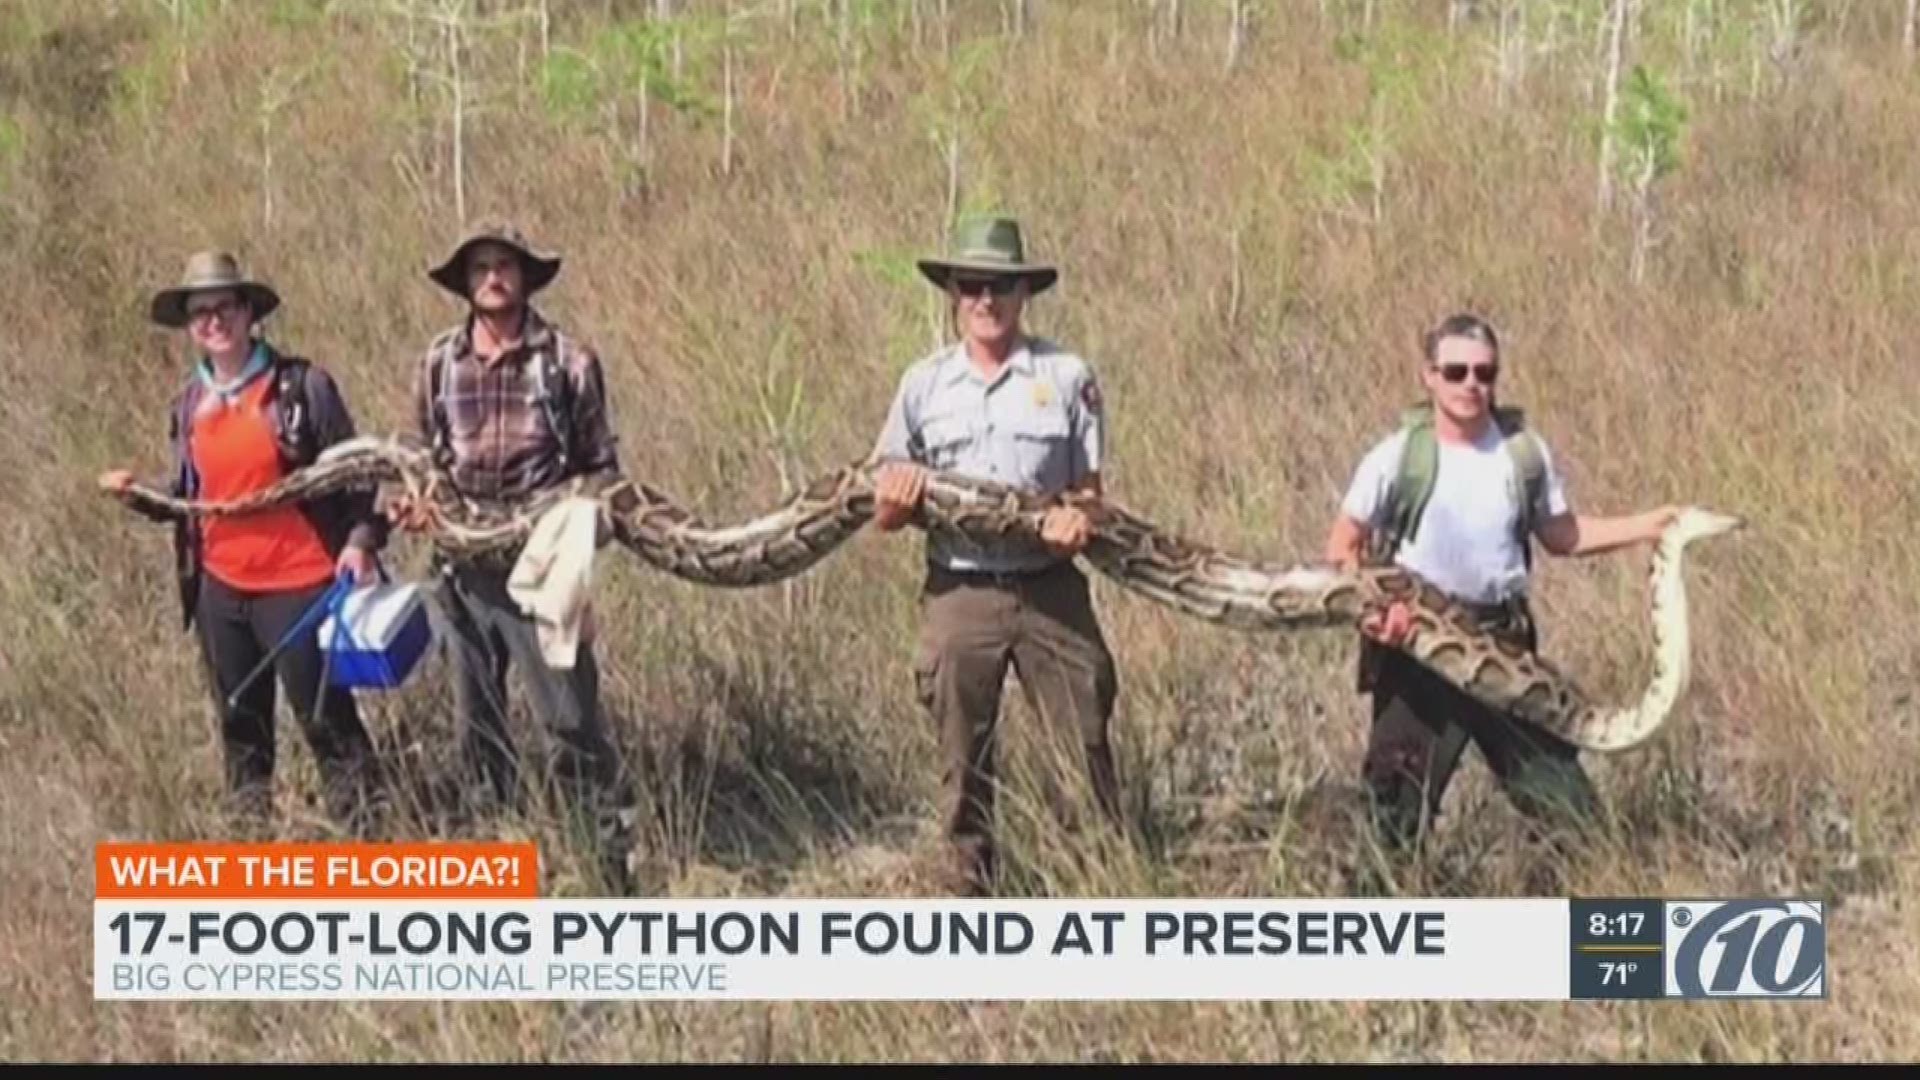 The snake was more than 17-feet-long, weighed 140 pounds and had 73 developing eggs in her.